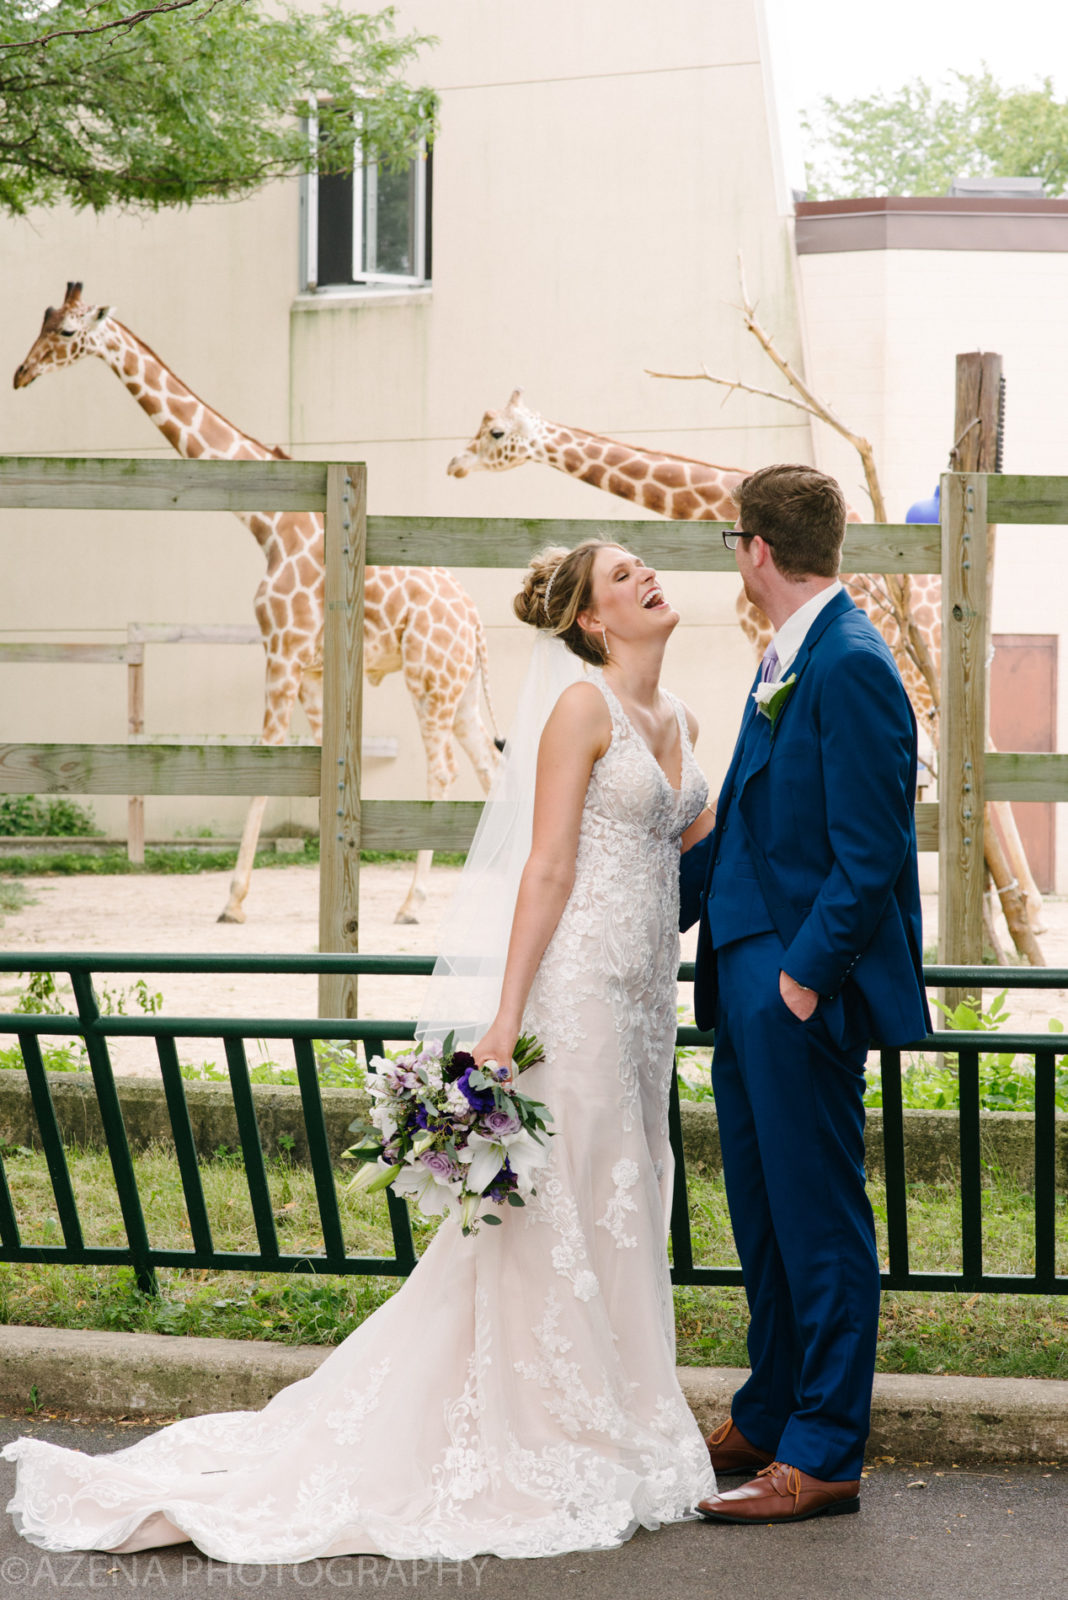 bride and groom at henry vilas zoo with giraffes